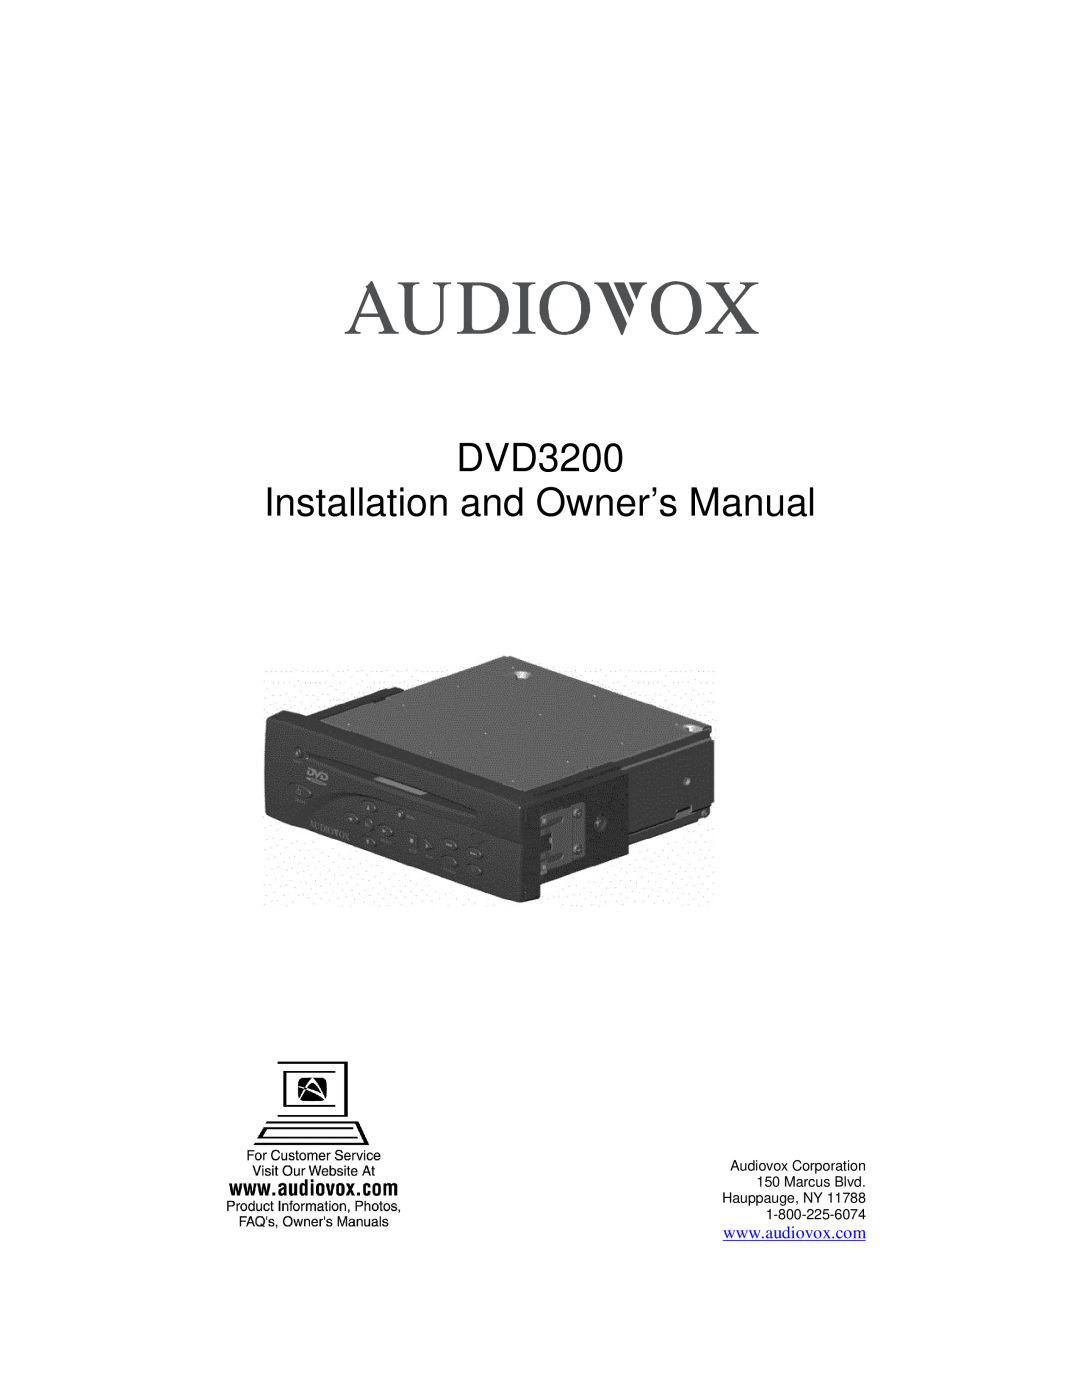 Audiovox owner manual DVD3200 Installation and Owner’s Manual, Audiovox Corporation 150 Marcus Blvd Hauppauge, NY 